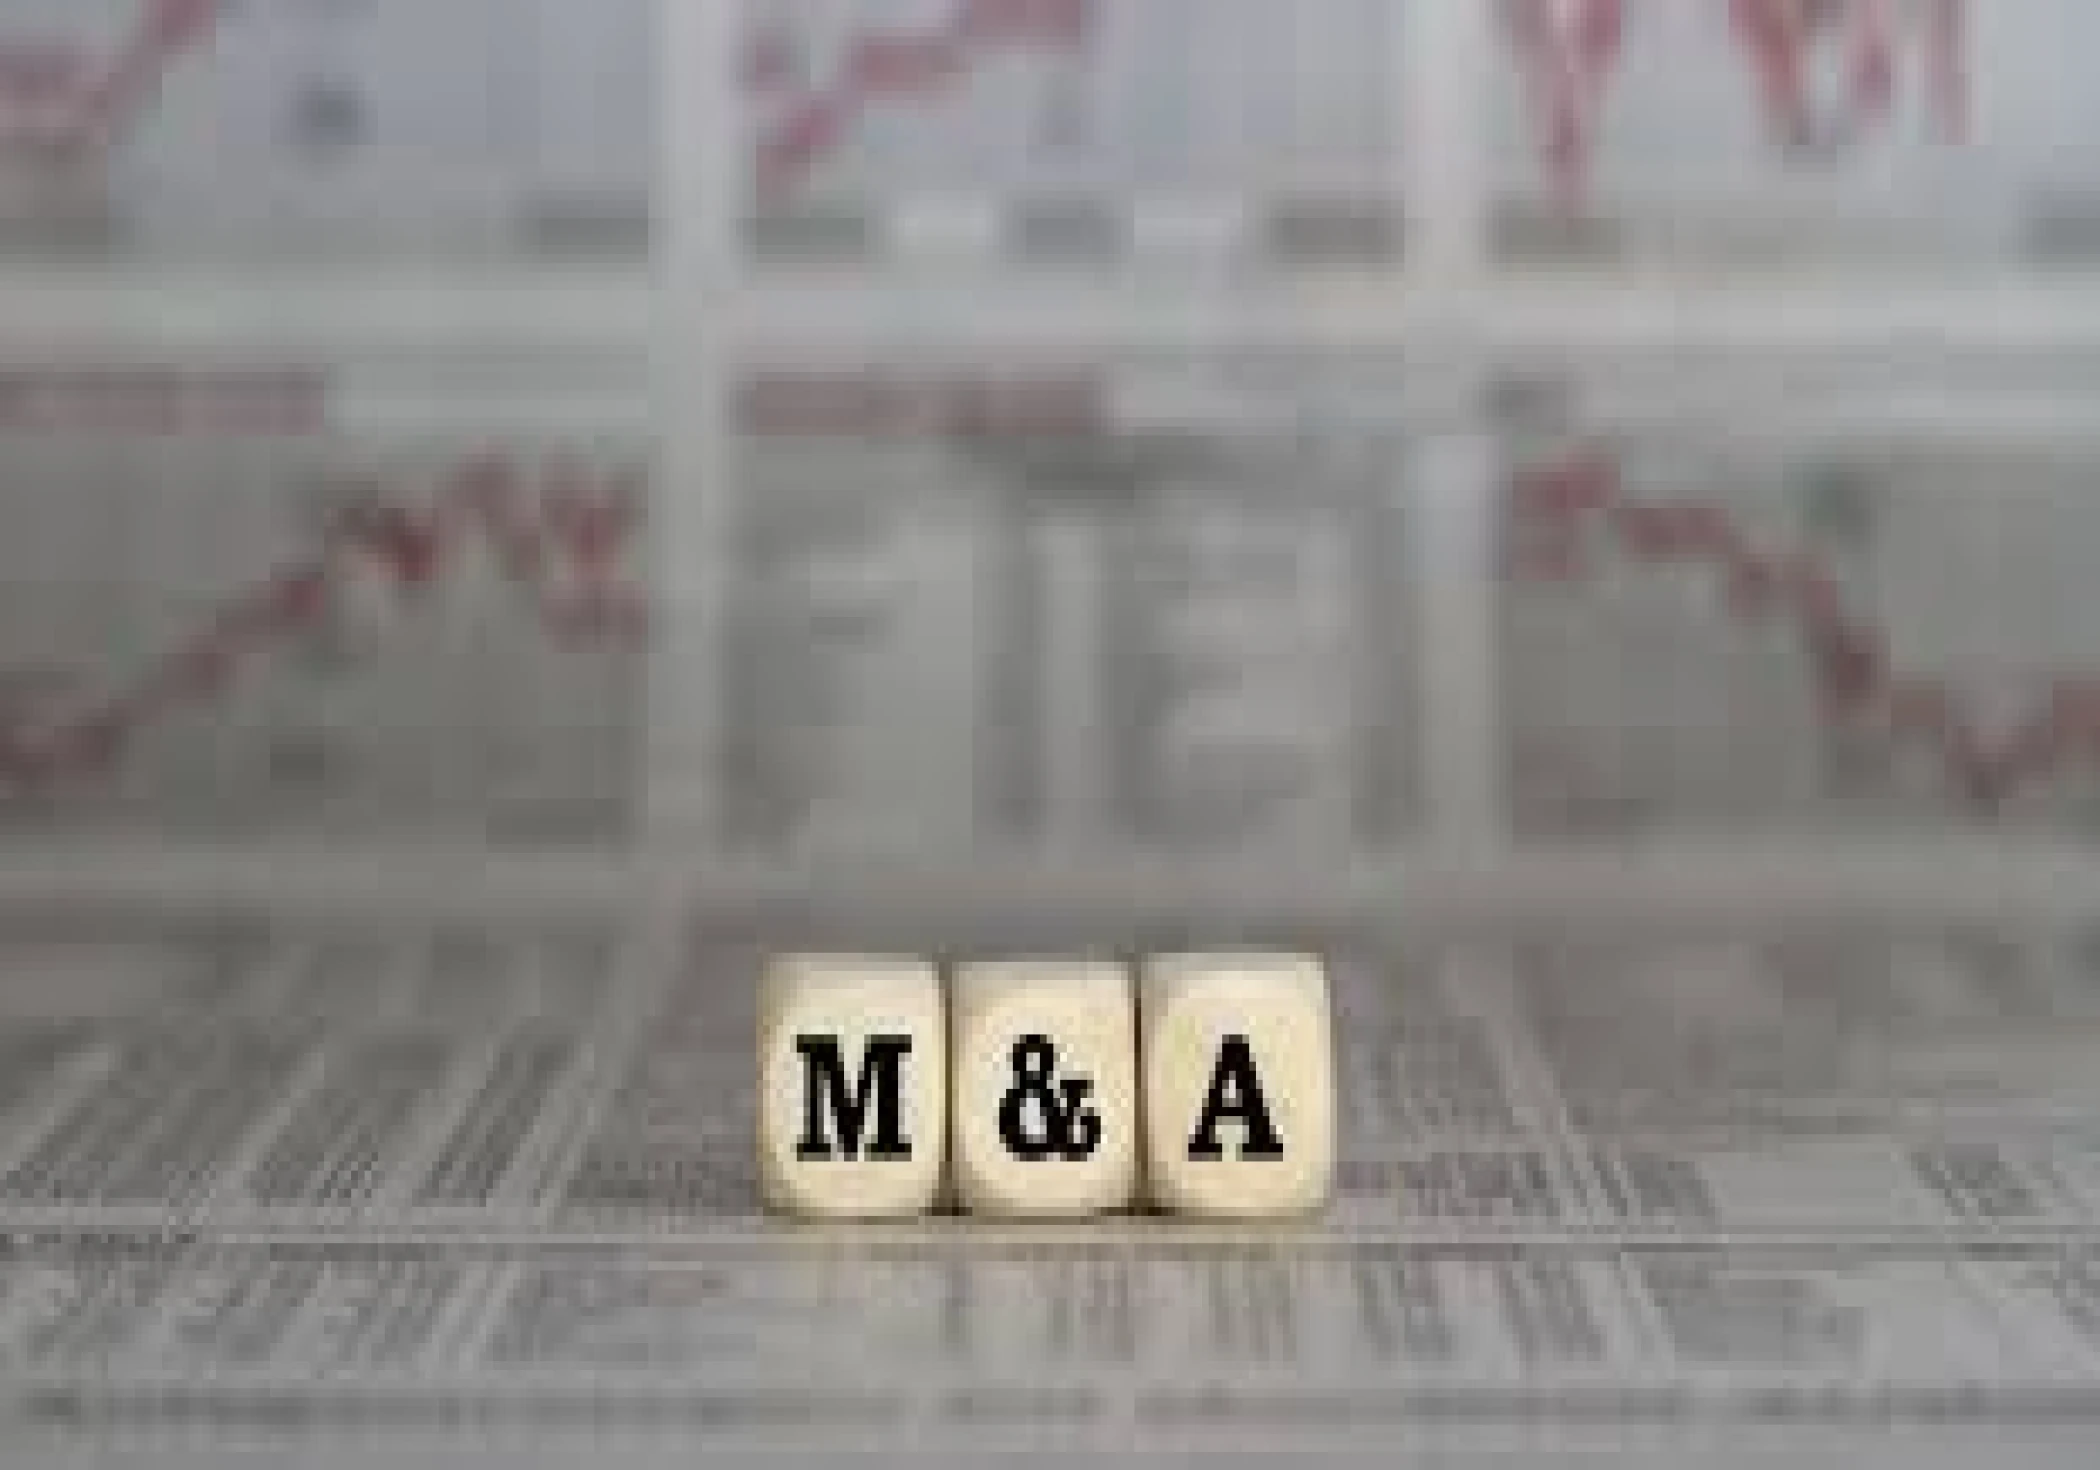 Streamlining Mergers and Acquisitions: MCA Raises Thresholds for CCI Approval